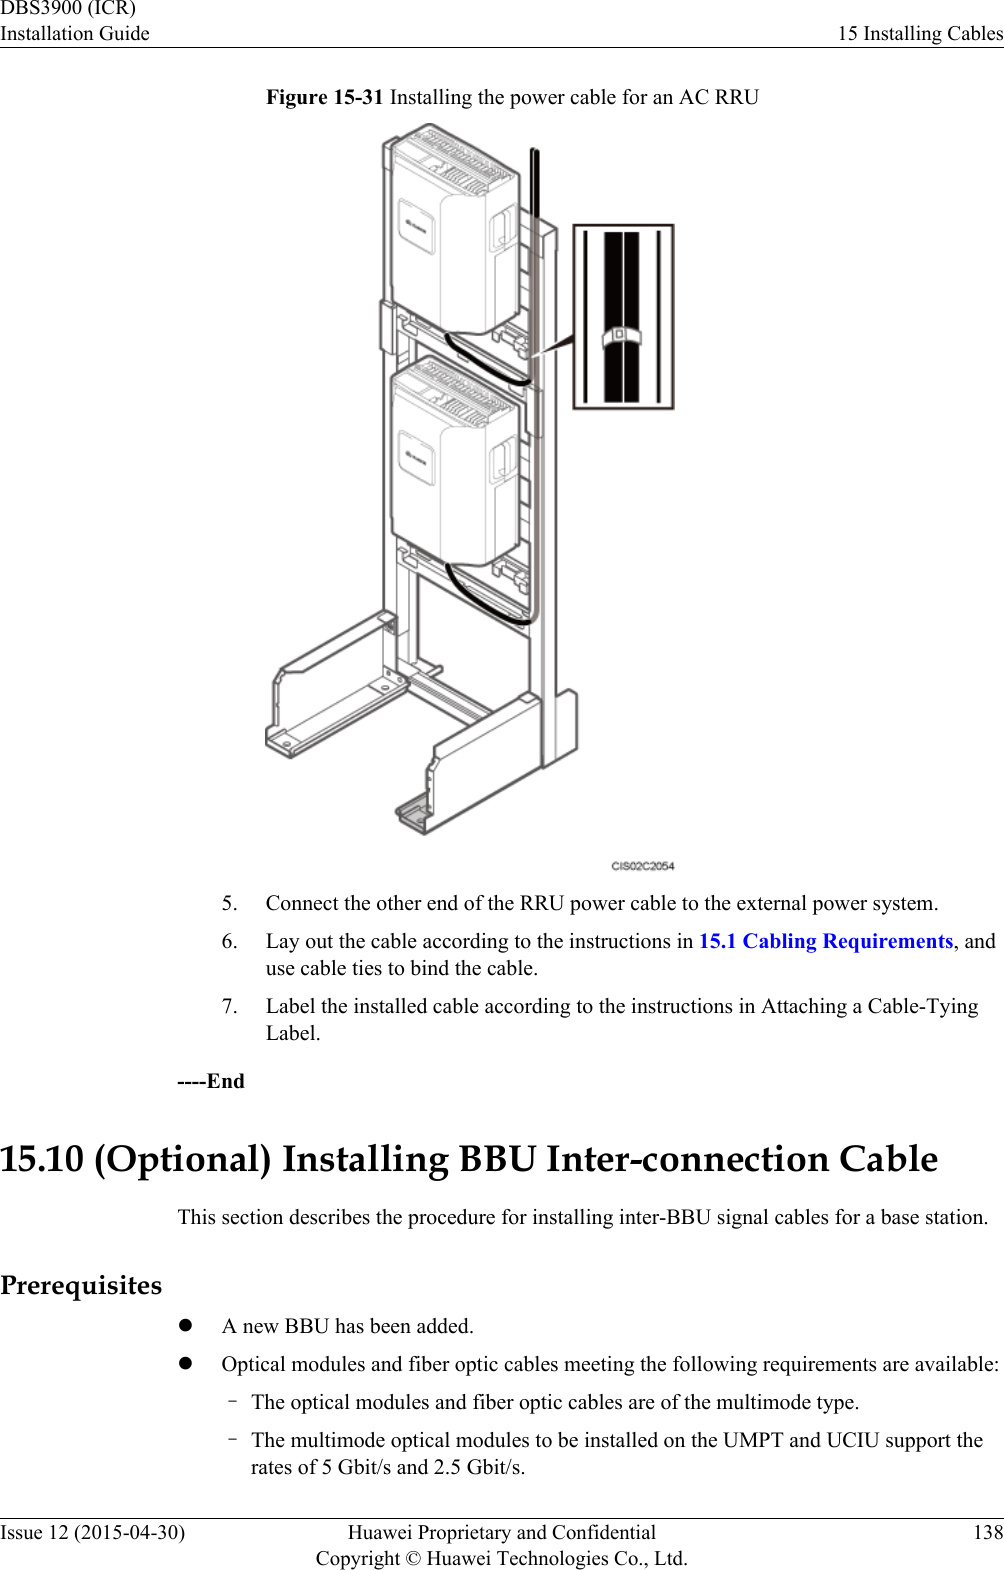 Figure 15-31 Installing the power cable for an AC RRU5. Connect the other end of the RRU power cable to the external power system.6. Lay out the cable according to the instructions in 15.1 Cabling Requirements, anduse cable ties to bind the cable.7. Label the installed cable according to the instructions in Attaching a Cable-TyingLabel.----End15.10 (Optional) Installing BBU Inter-connection CableThis section describes the procedure for installing inter-BBU signal cables for a base station.PrerequisiteslA new BBU has been added.lOptical modules and fiber optic cables meeting the following requirements are available:–The optical modules and fiber optic cables are of the multimode type.–The multimode optical modules to be installed on the UMPT and UCIU support therates of 5 Gbit/s and 2.5 Gbit/s.DBS3900 (ICR)Installation Guide 15 Installing CablesIssue 12 (2015-04-30) Huawei Proprietary and ConfidentialCopyright © Huawei Technologies Co., Ltd.138